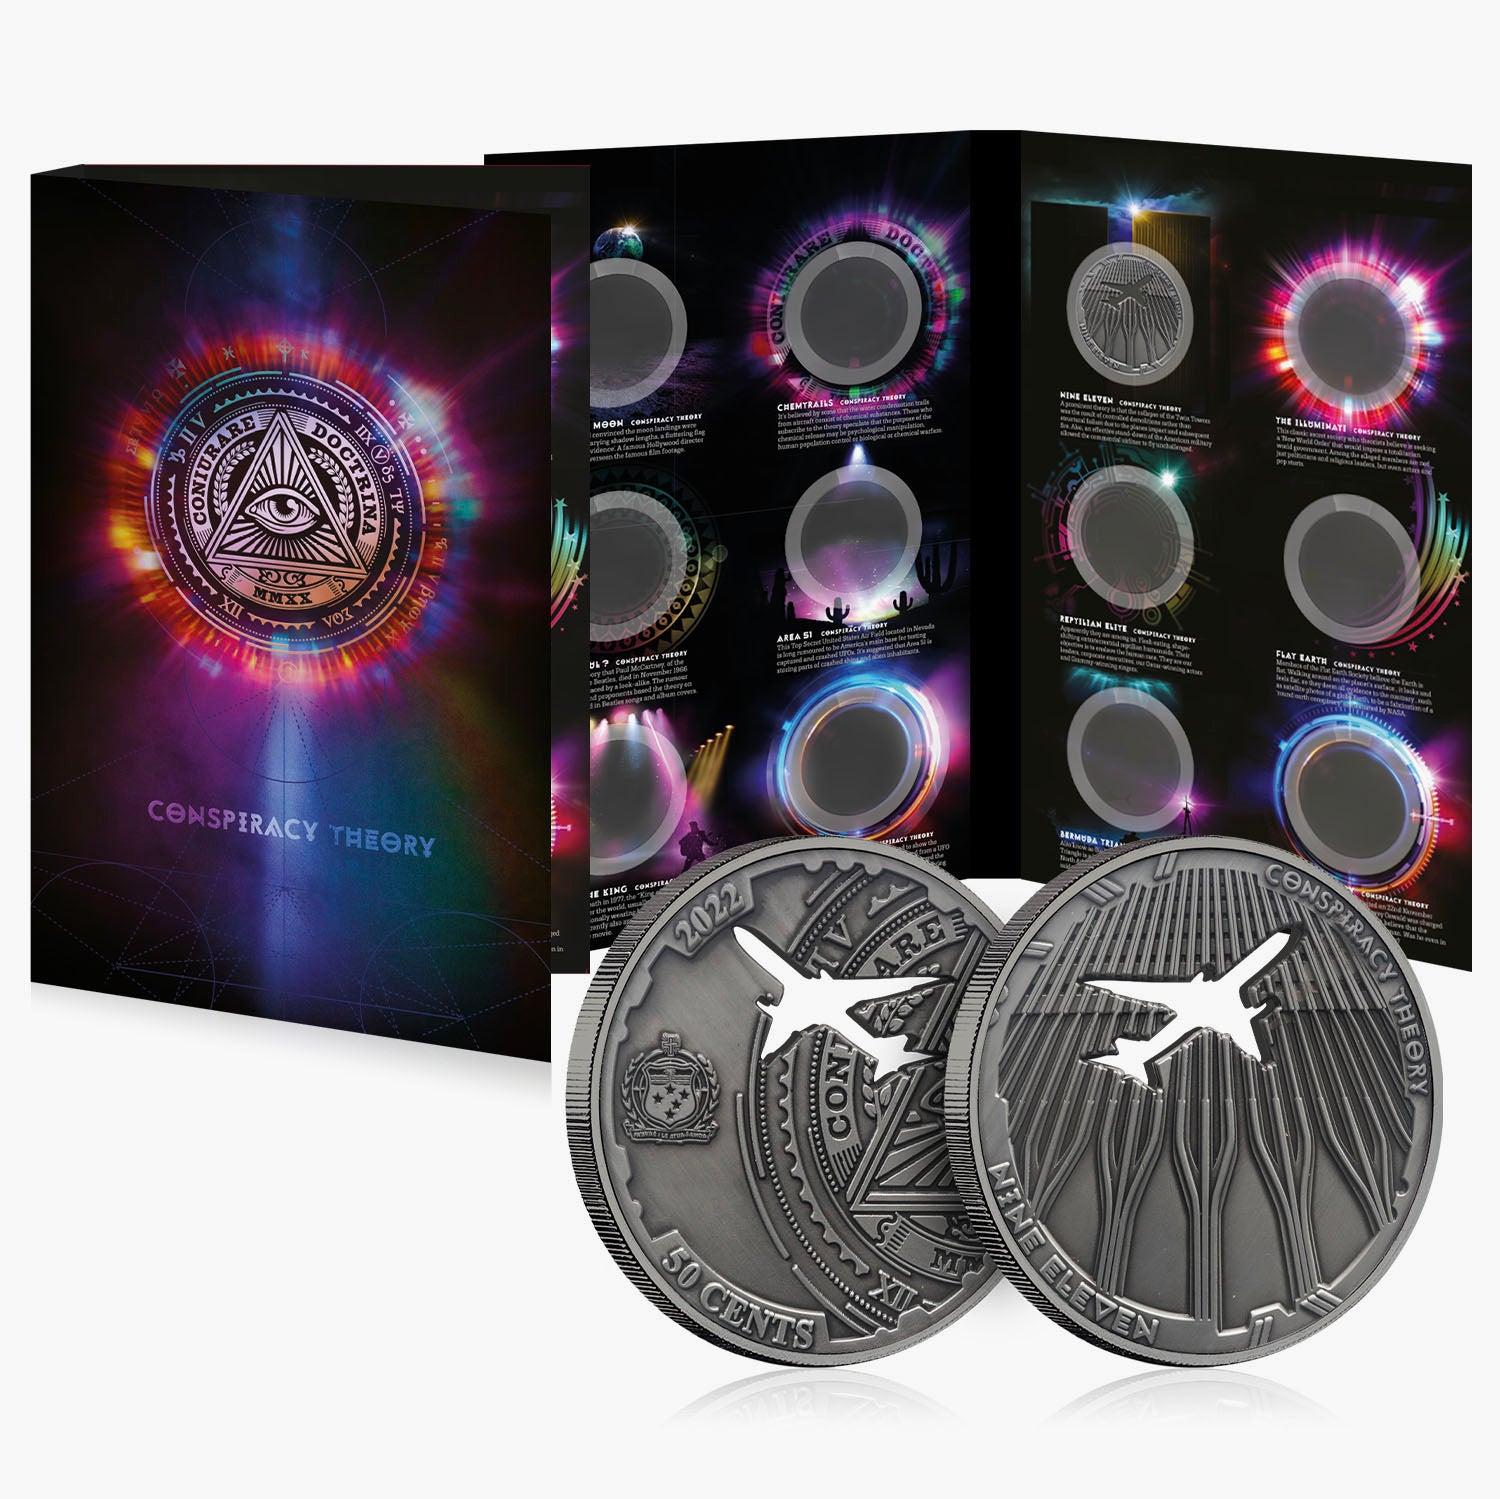 The Conspiracy Theory Coin Collection